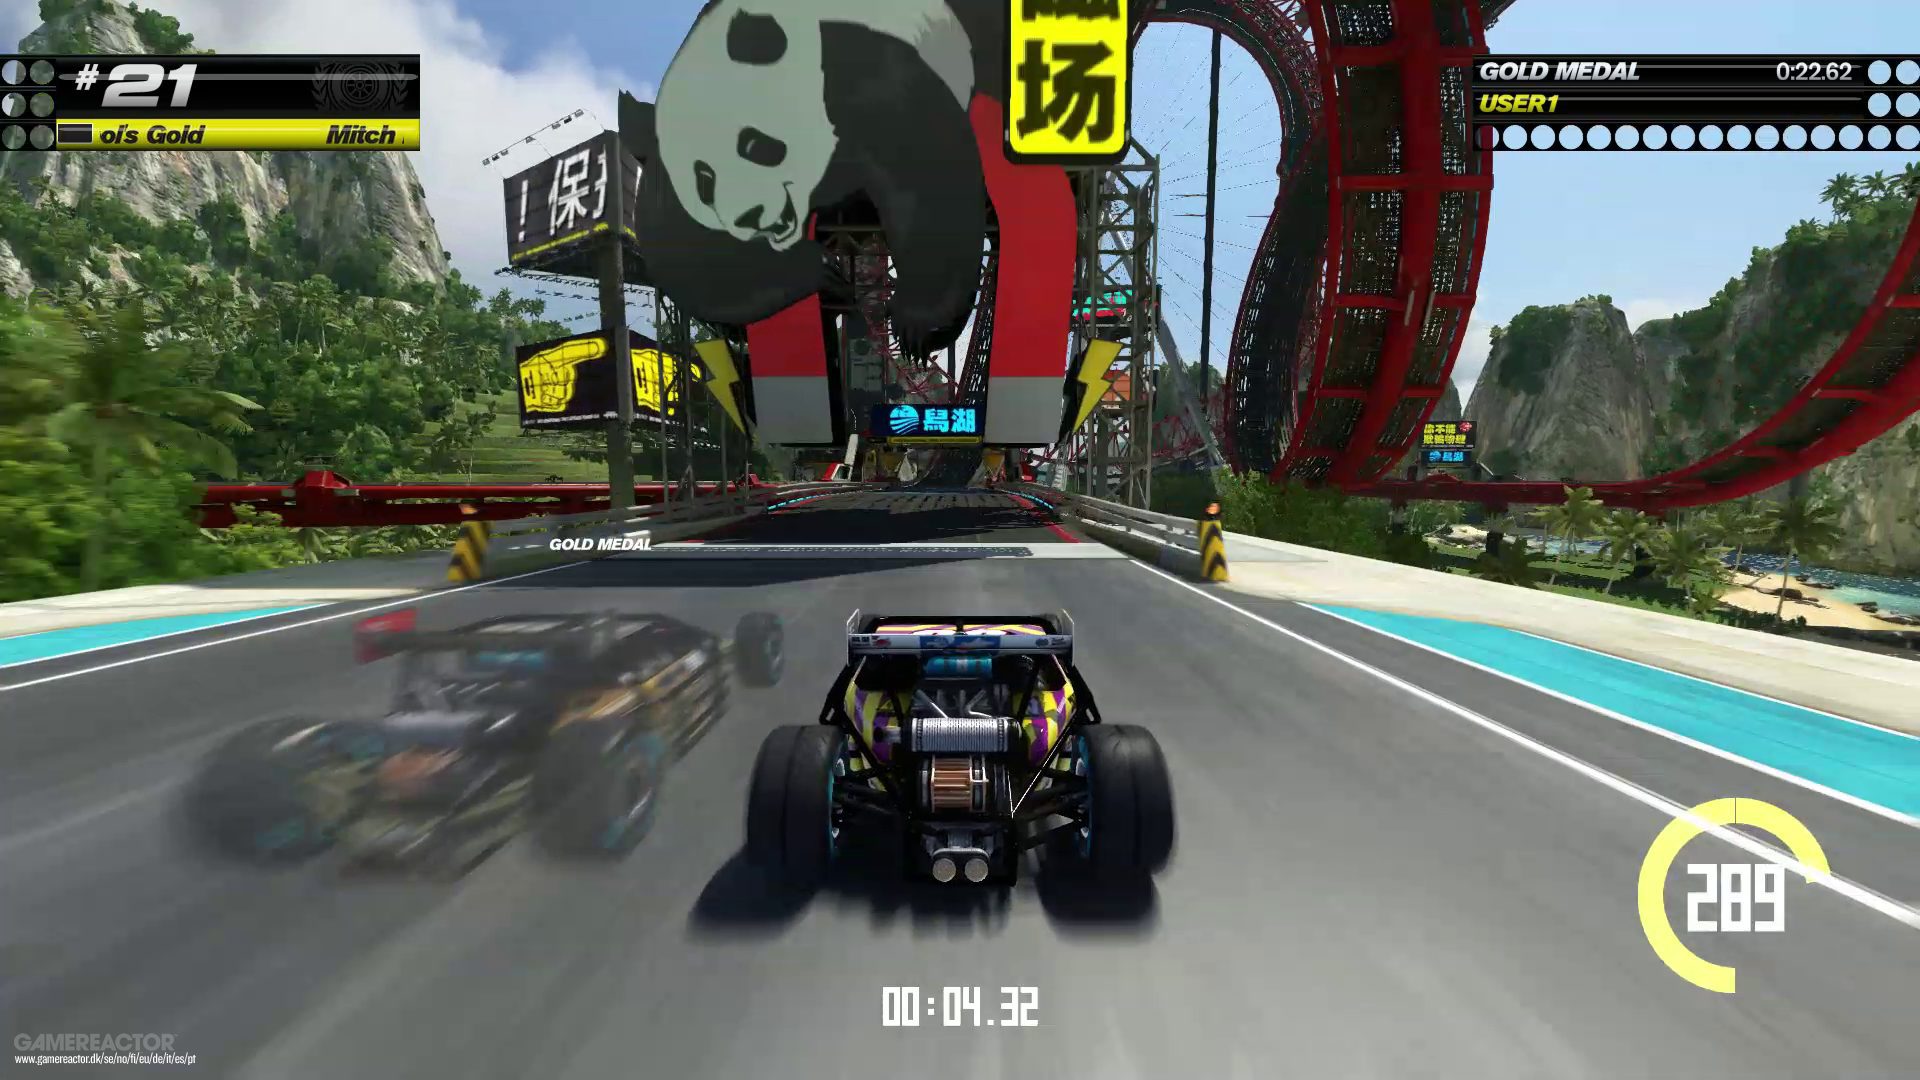 Download TrackMania Turbo Game Full Version